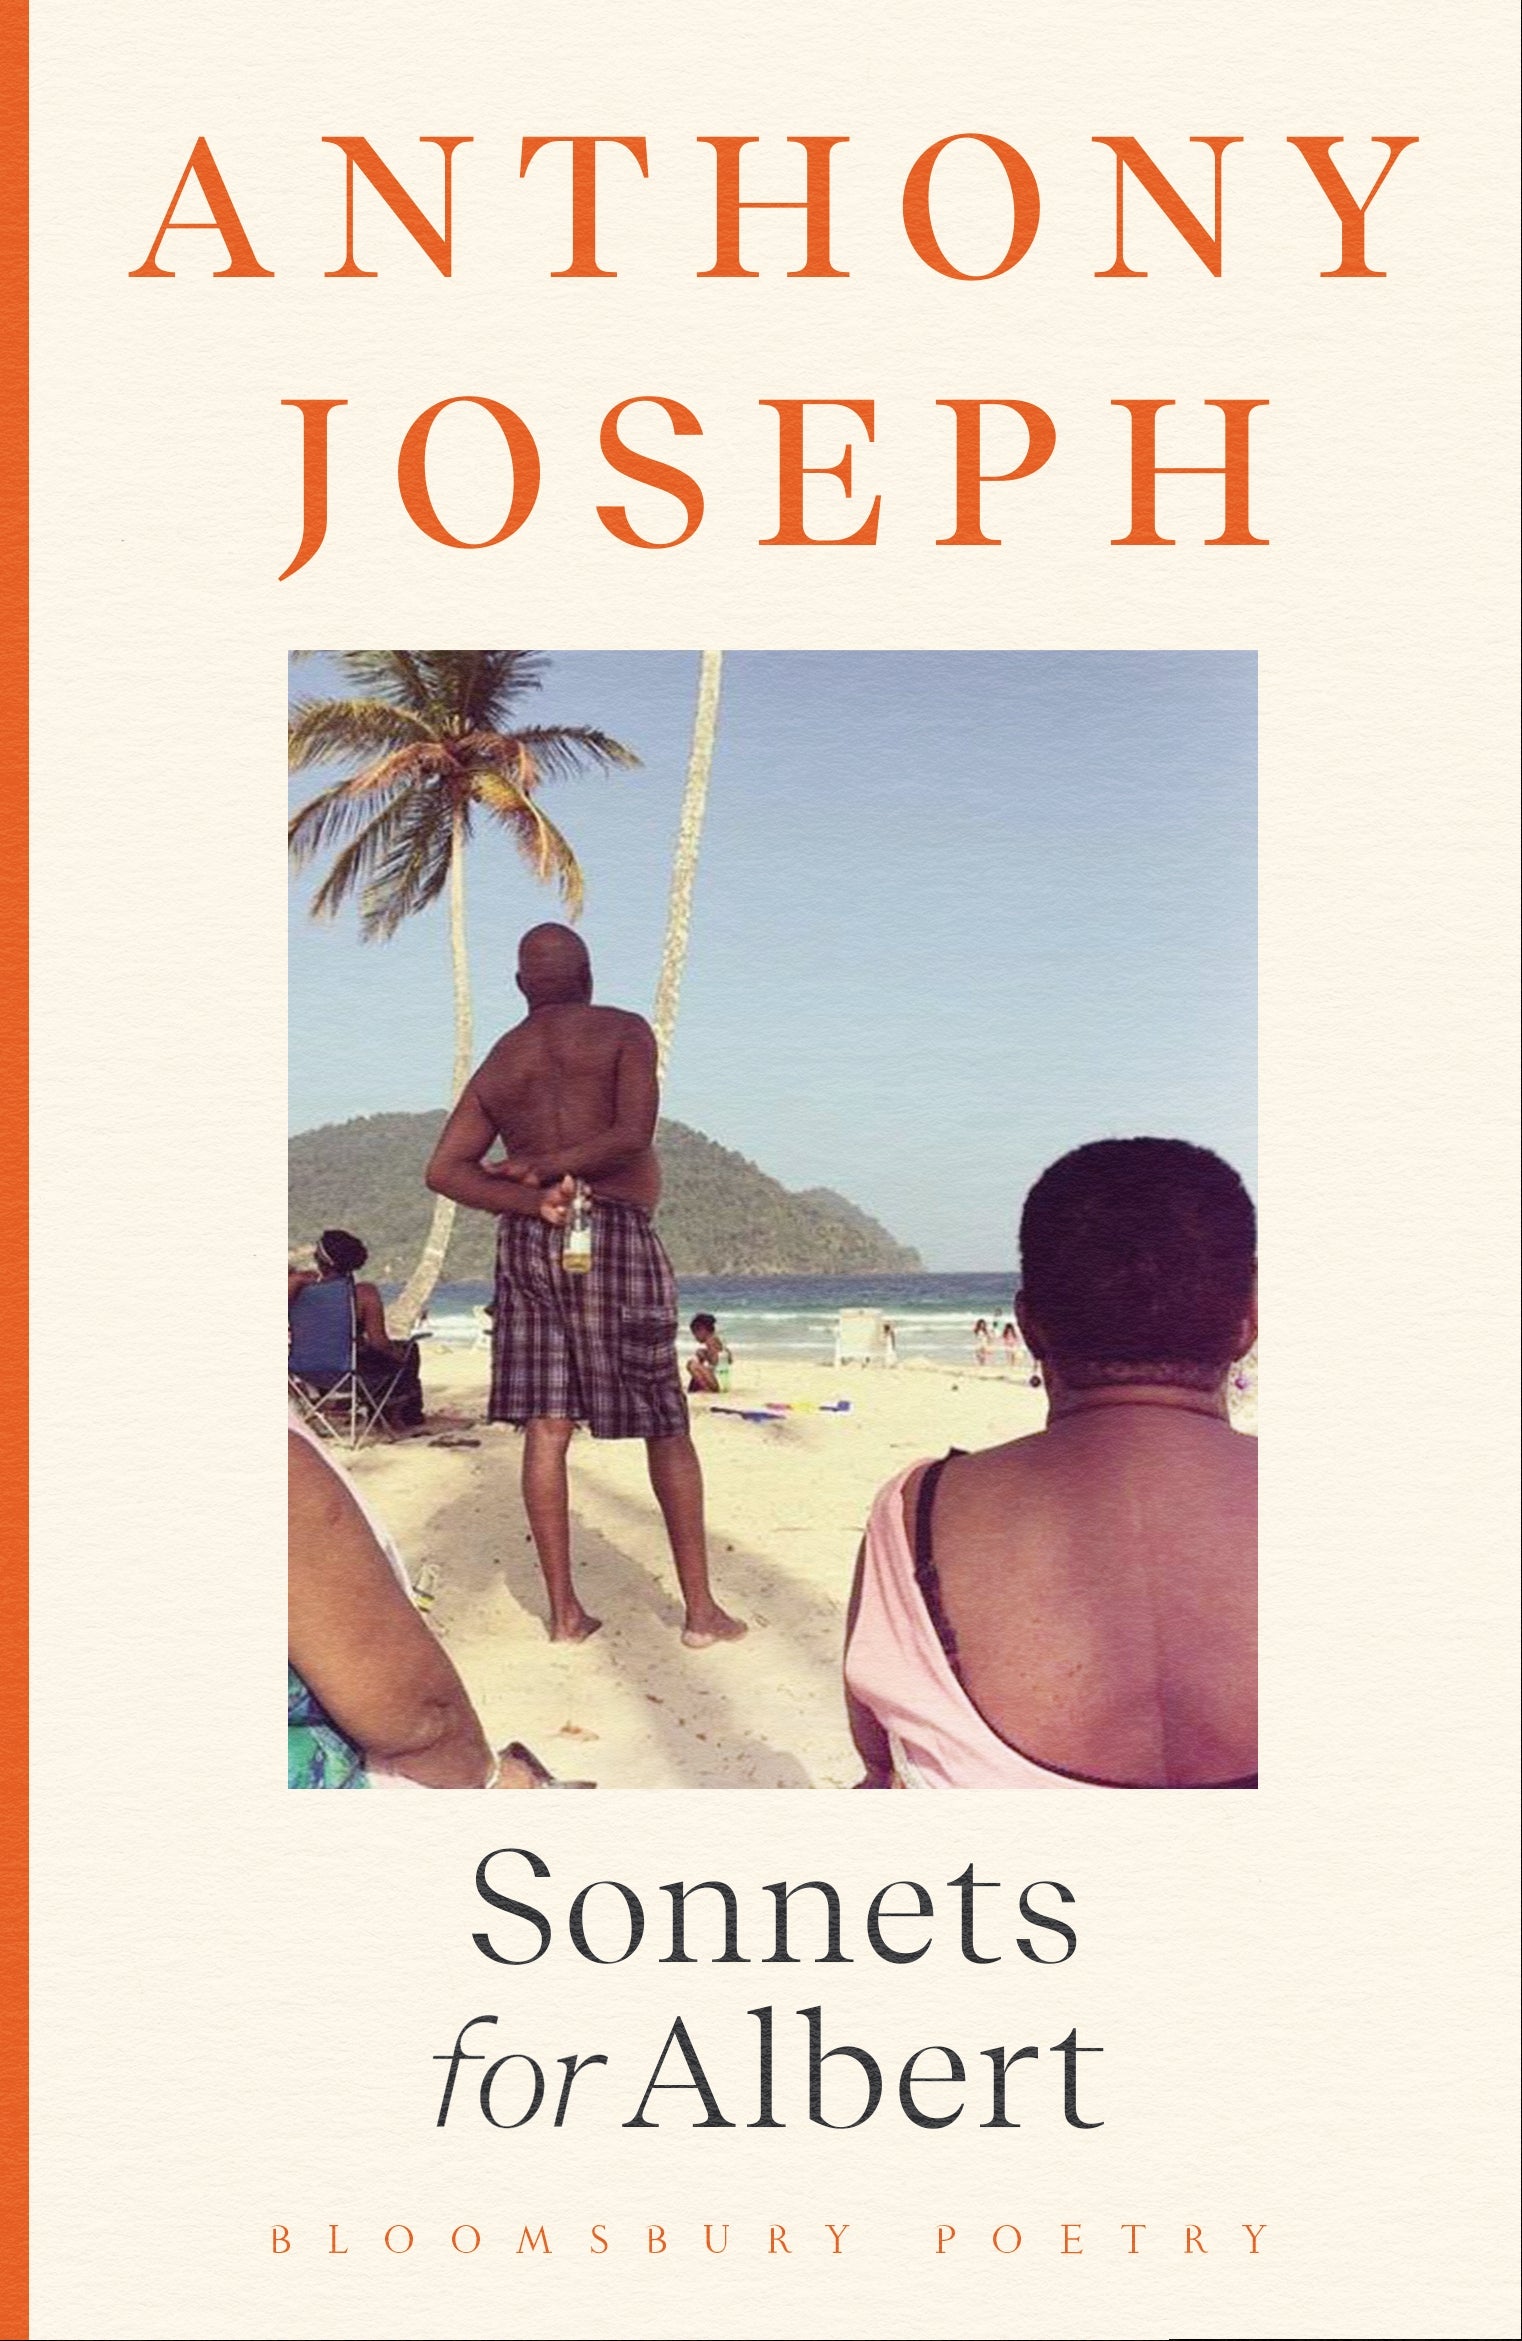 Anthony Joseph’s ‘Sonnets For Albert’ has been described as ‘a luminous collection which celebrates humanity in all its contradictions and breathes new life into this enduring form’